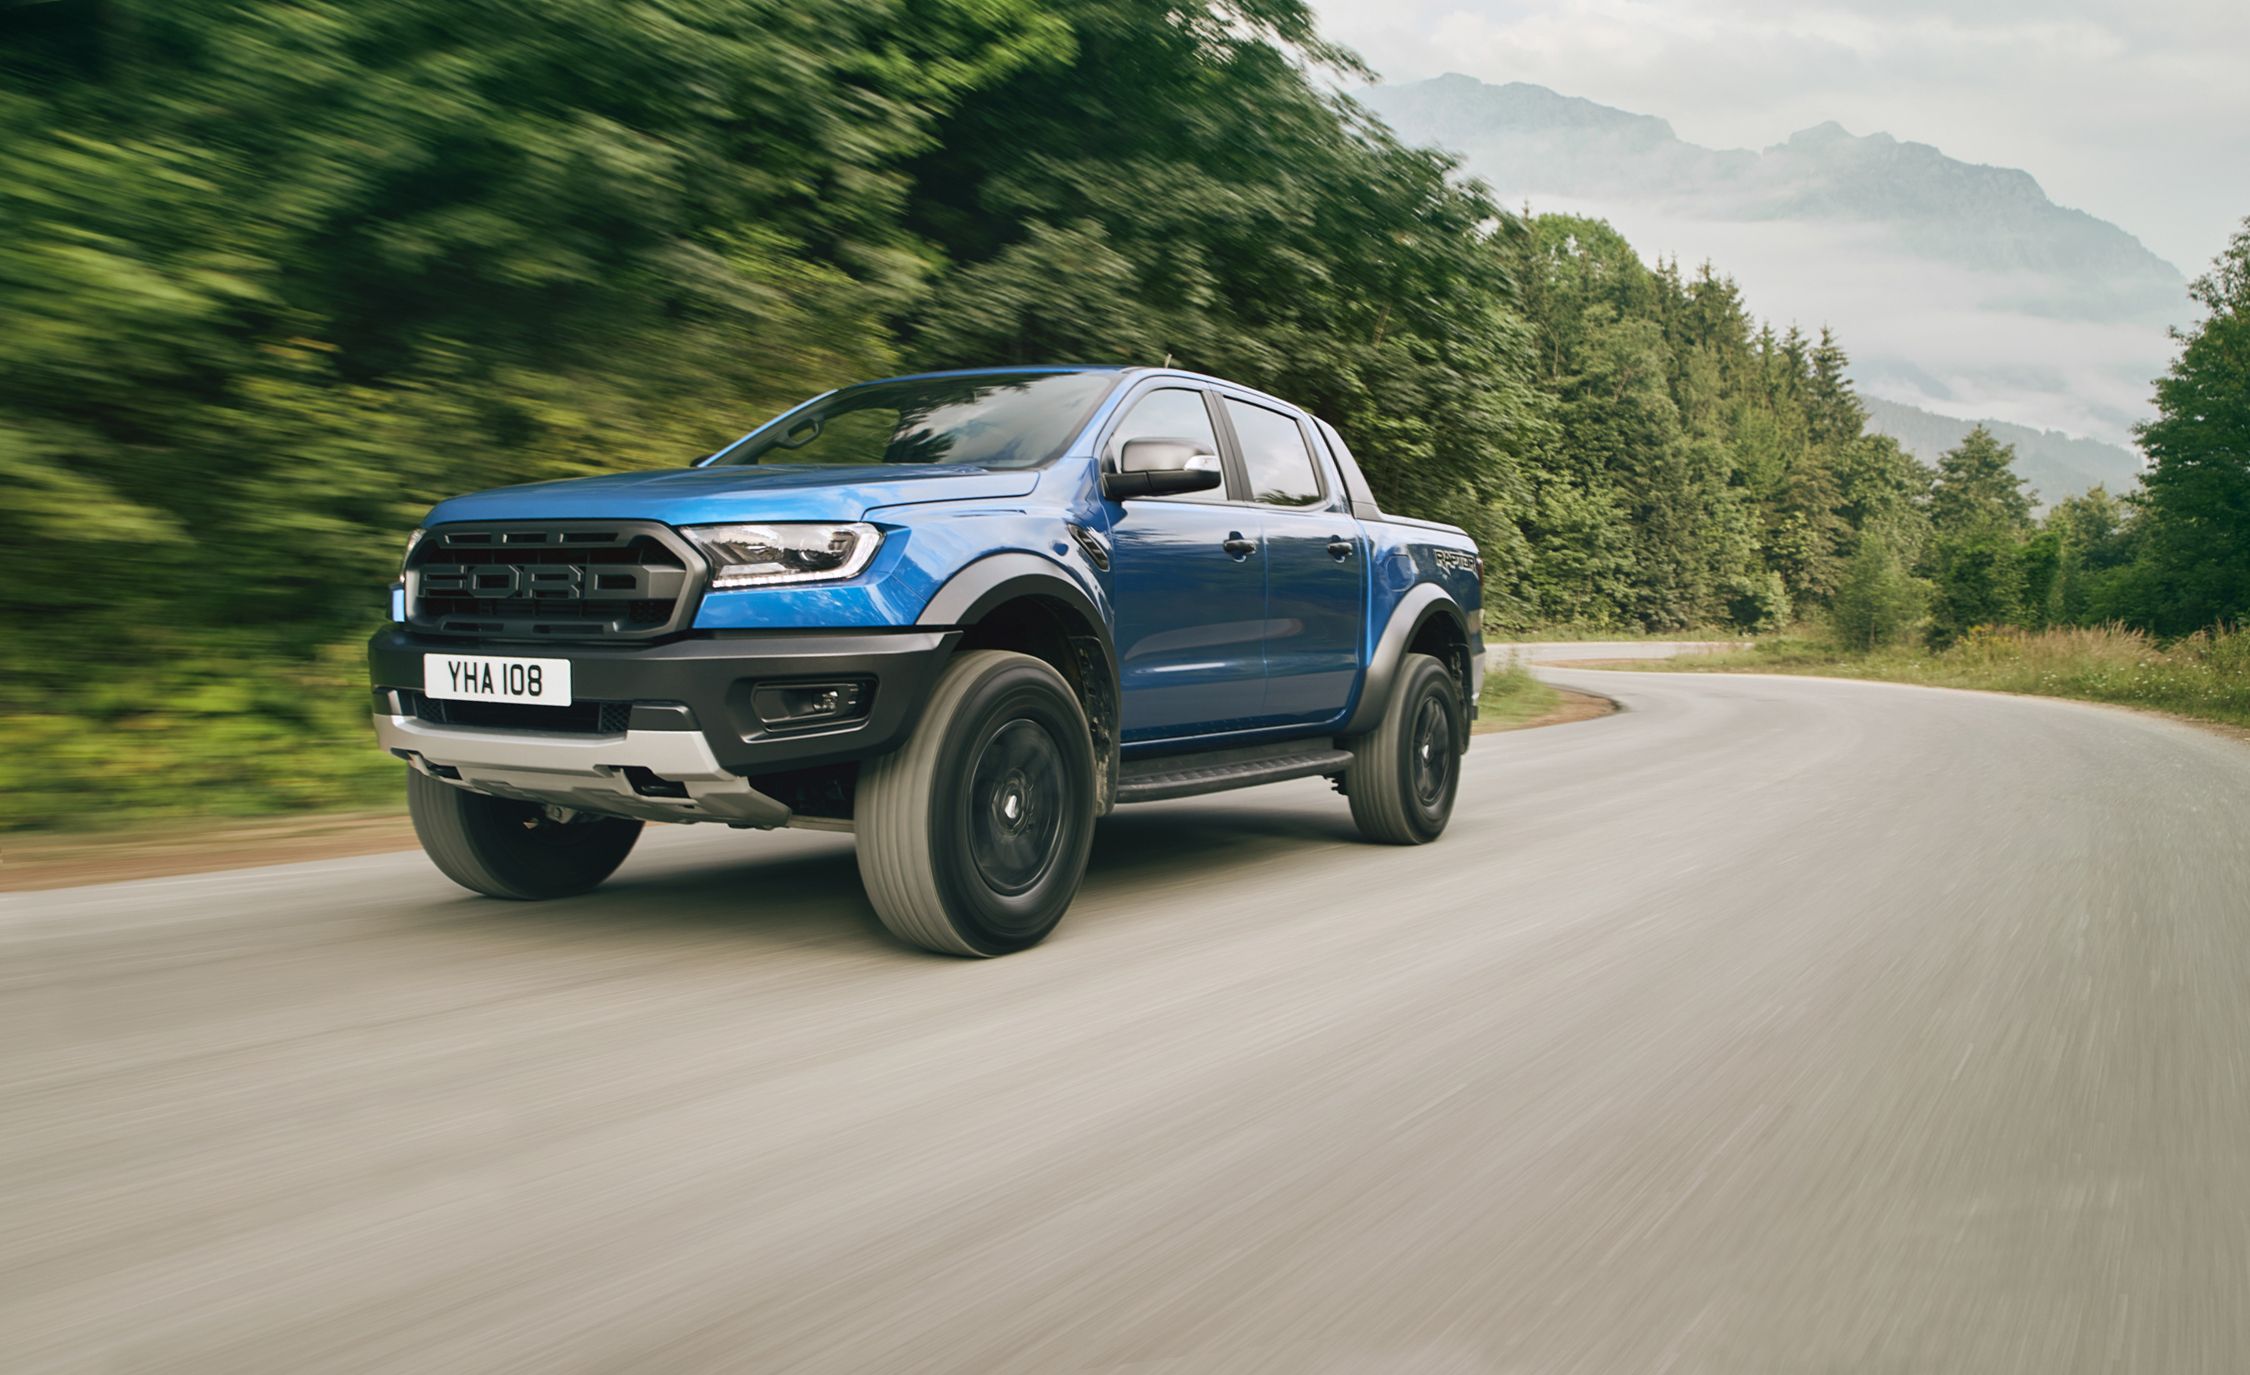 2019 Ford Ranger Raptor Officially Unveiled!